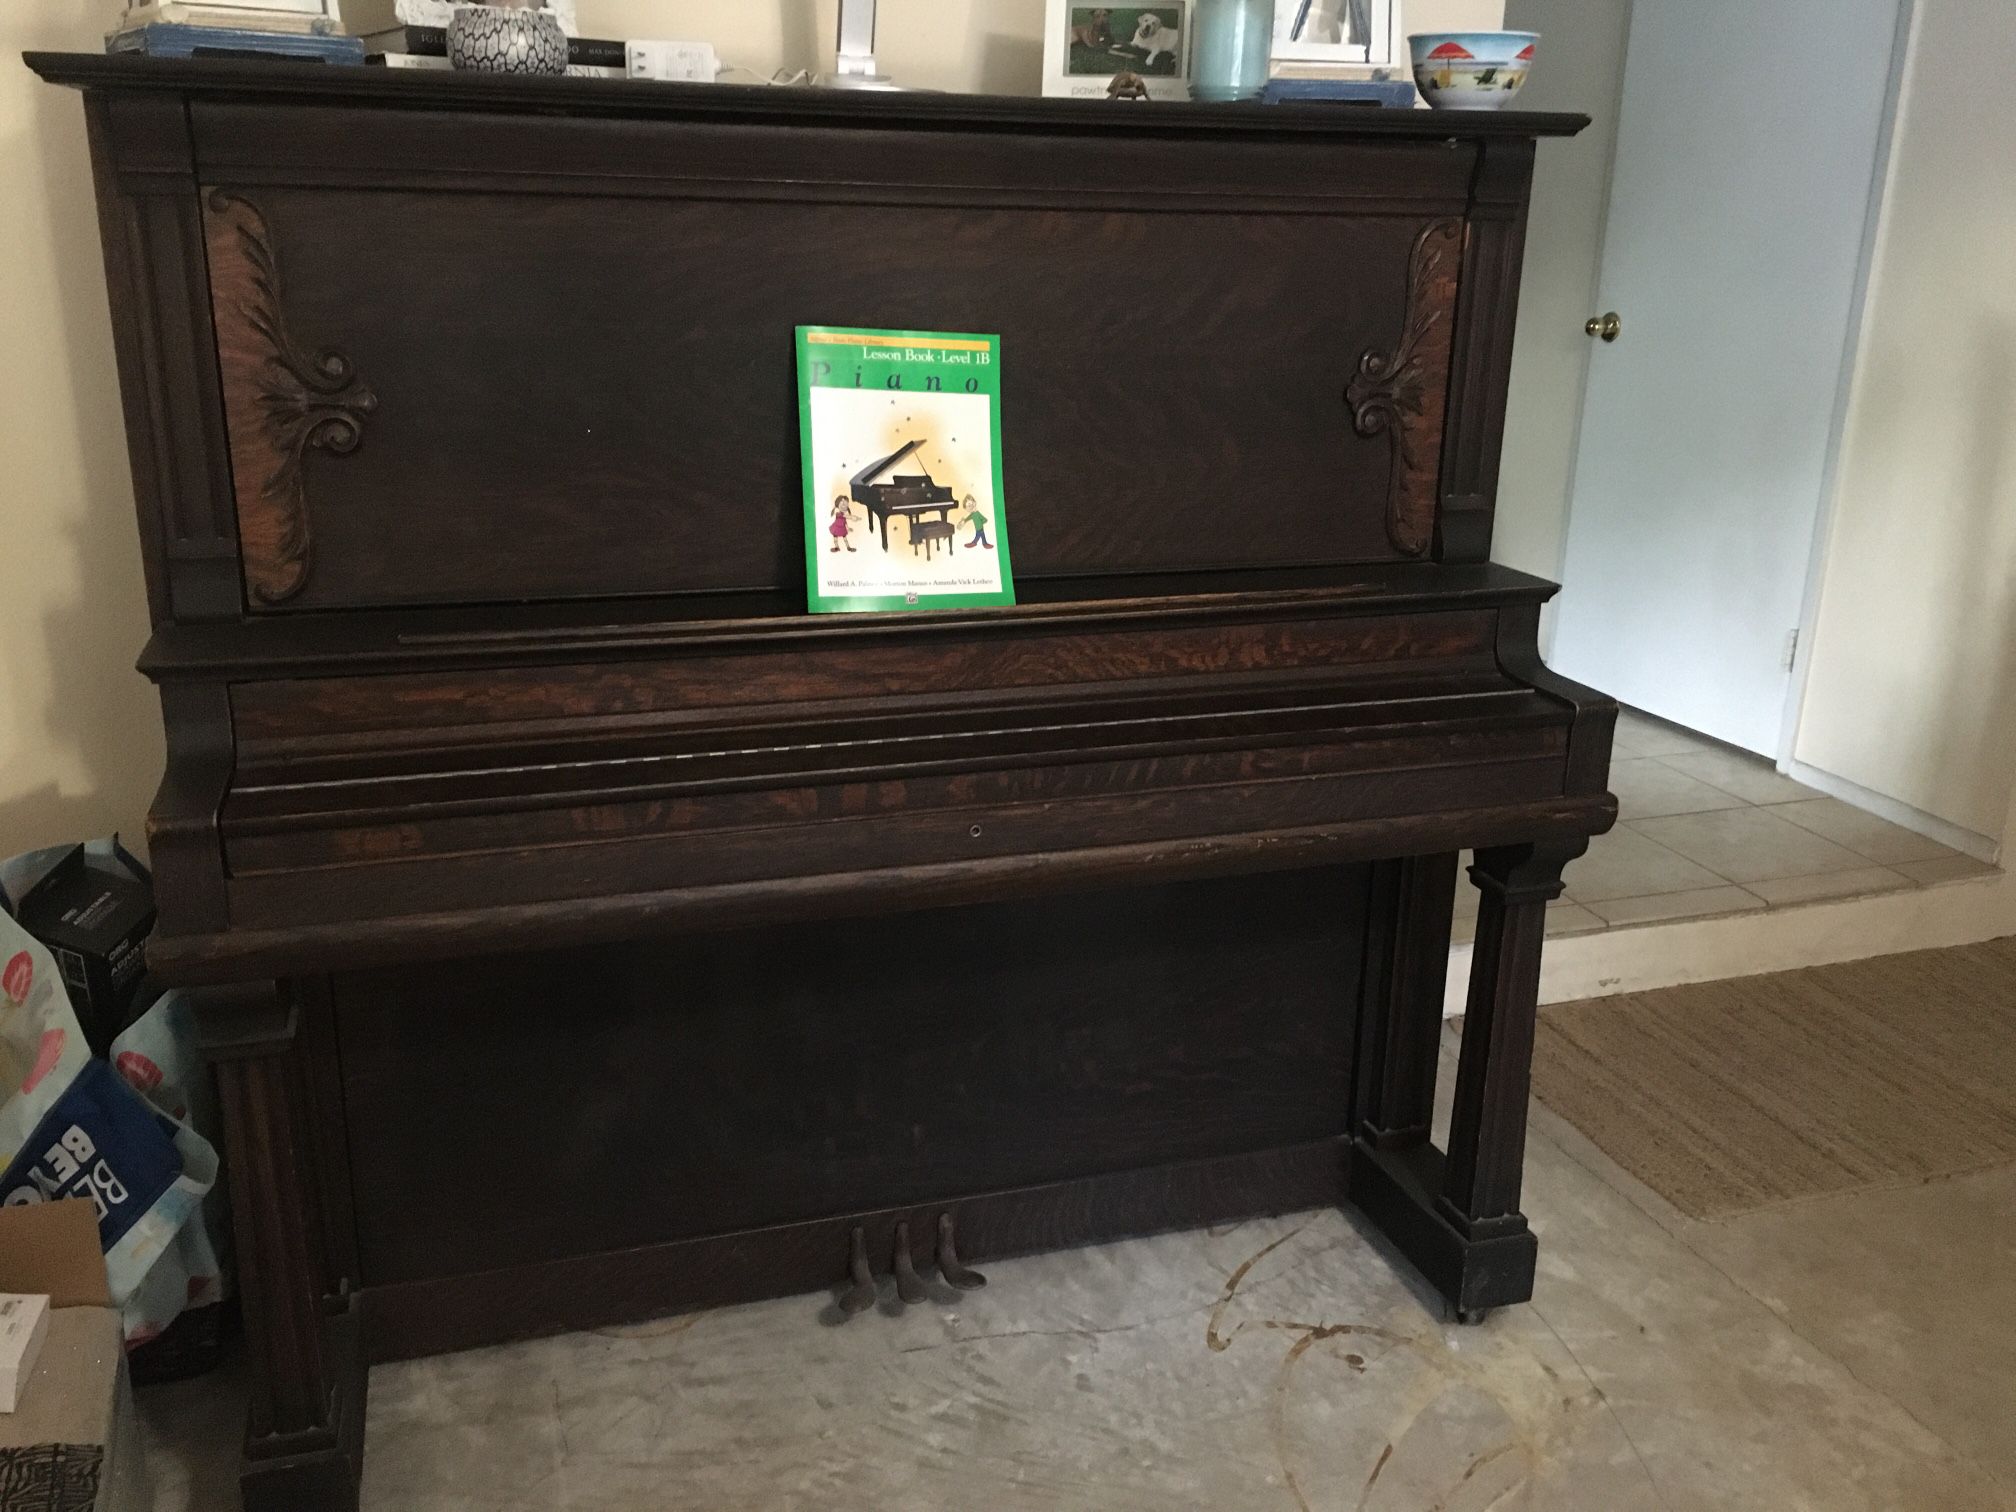 Lessing Upright Piano